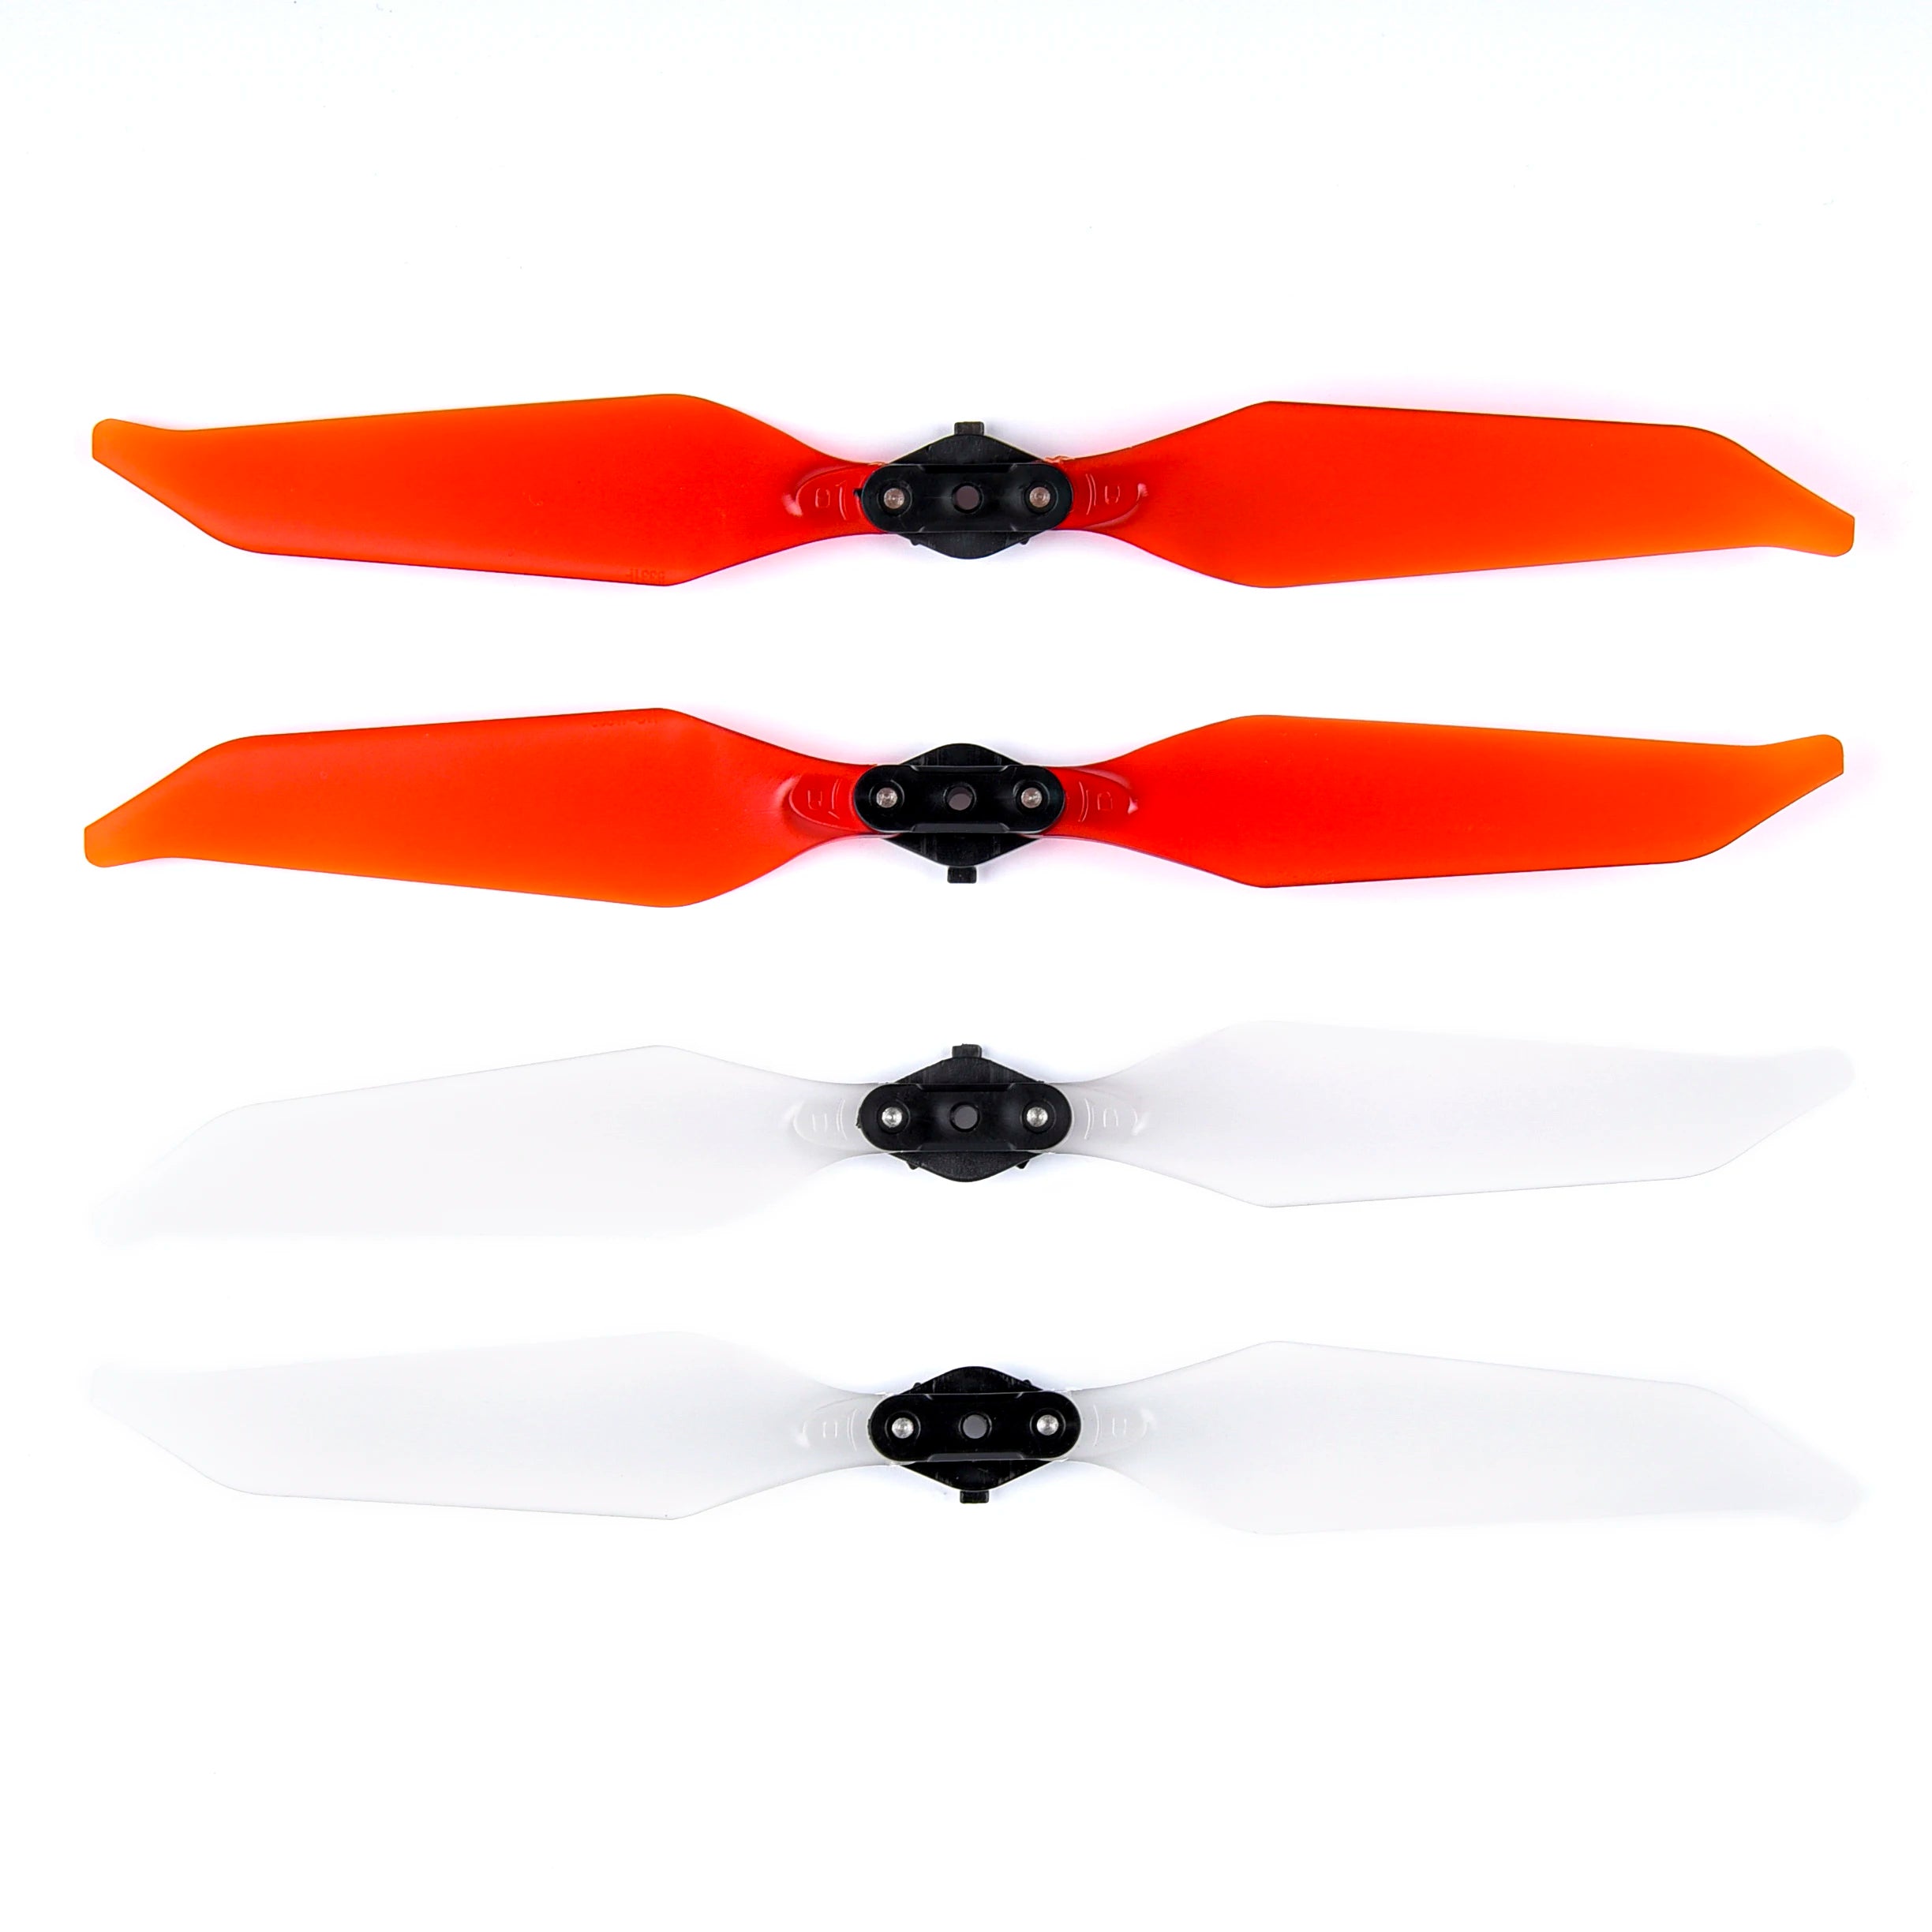 8331 8331F Low Noise Propeller, Low Noise Propeller - 4Pair/8pcs Replacement Propellers for M